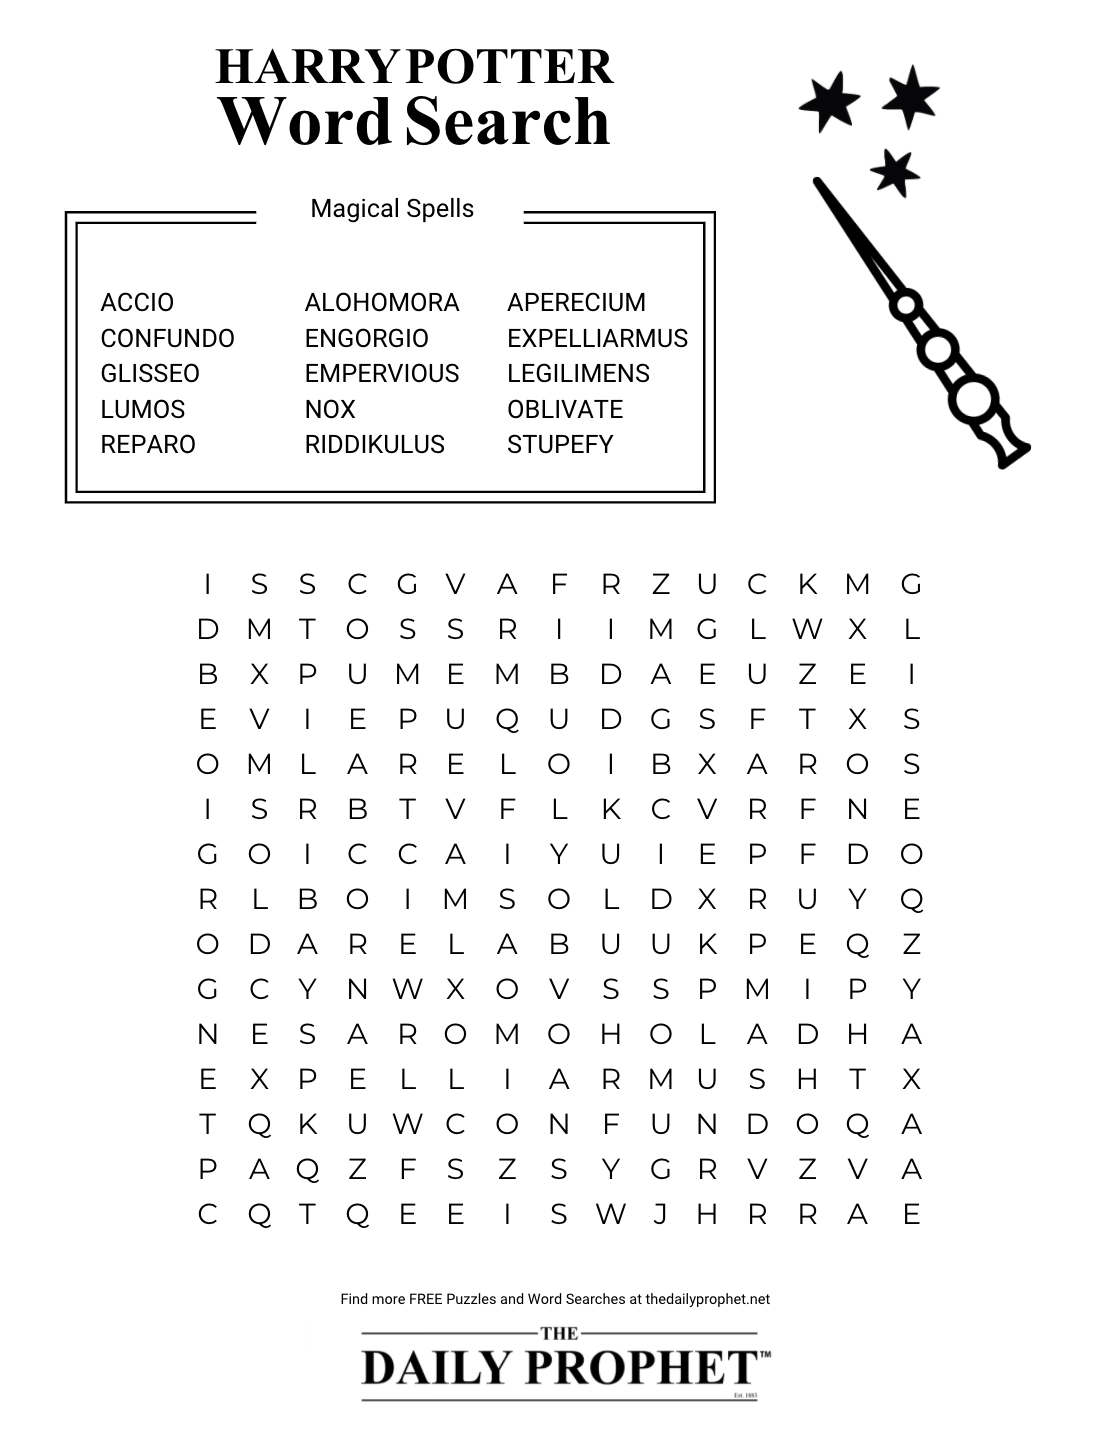 Harry Potter Word Search with Magical Spells